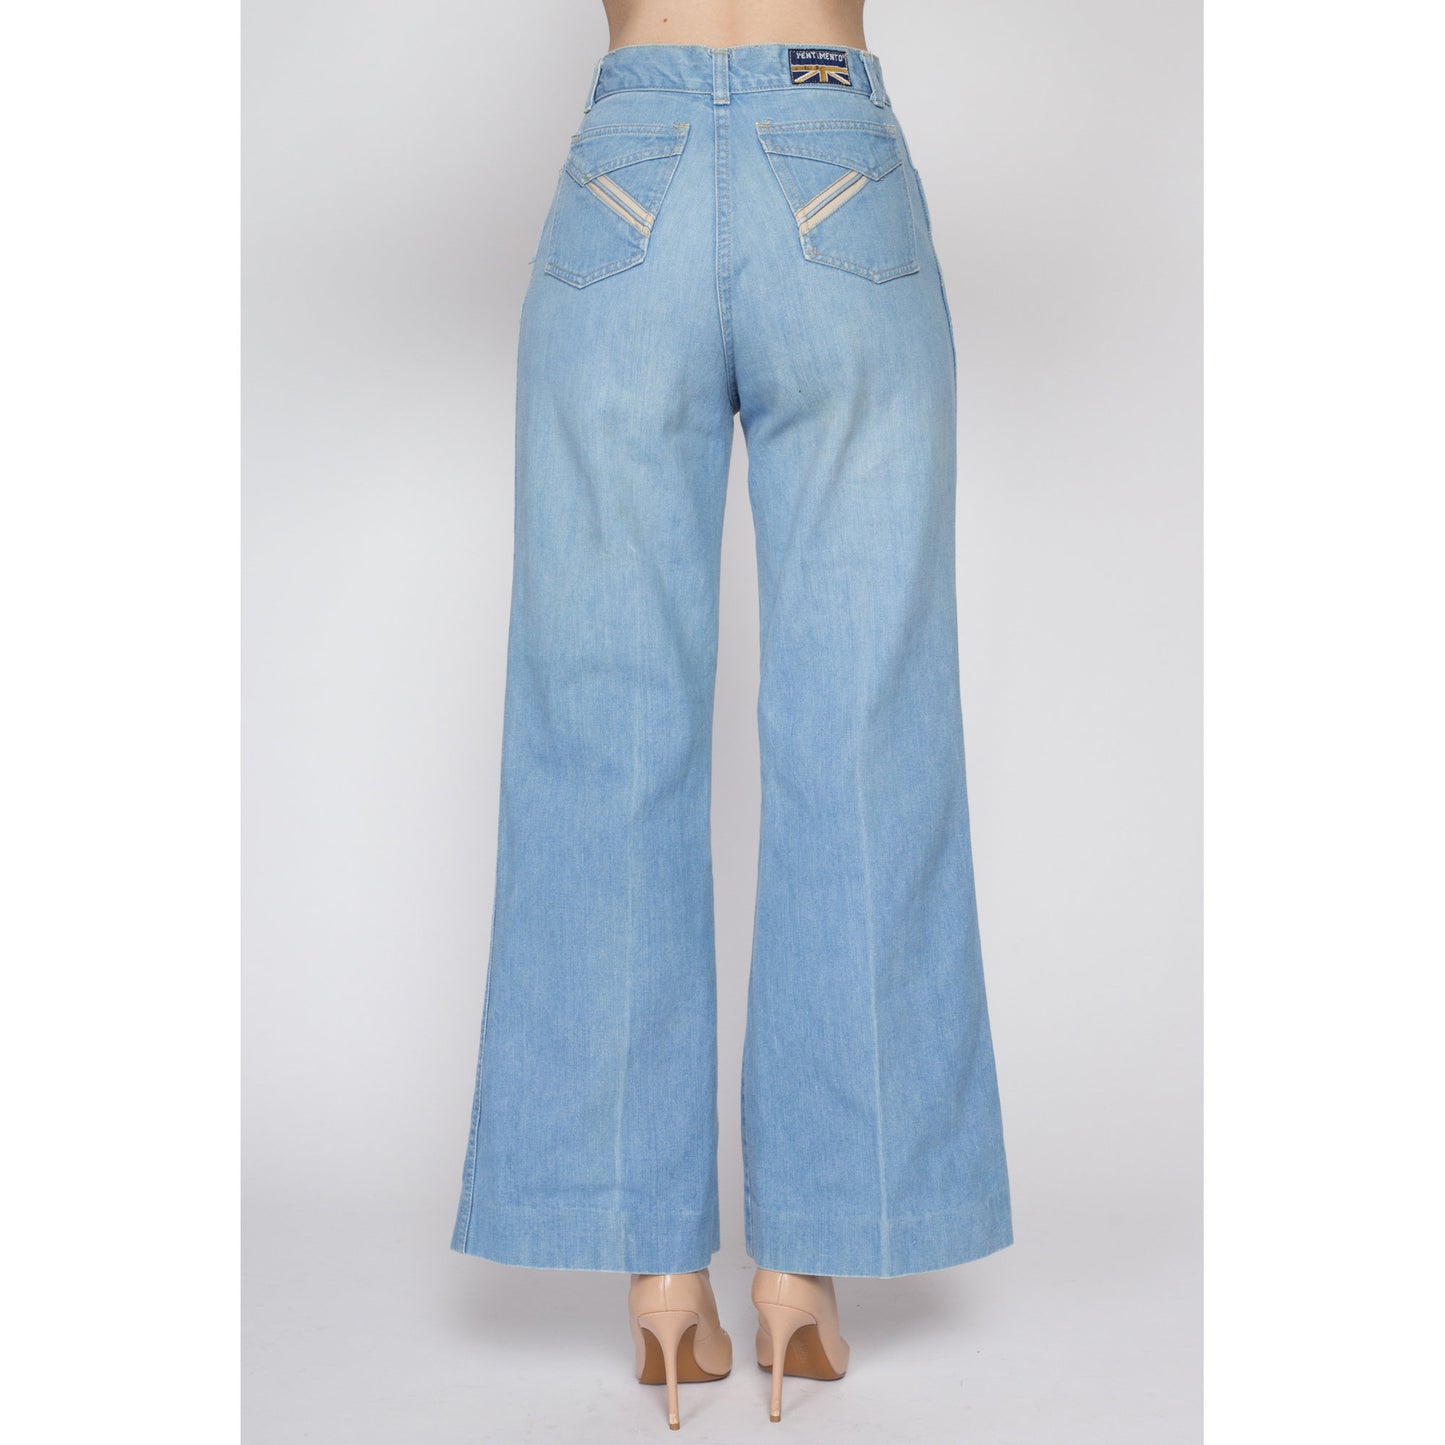 70s Gap Light Wash Flared Jeans Petite Extra Small Vintage High Waisted  Denim Boho Hippie Jeans 